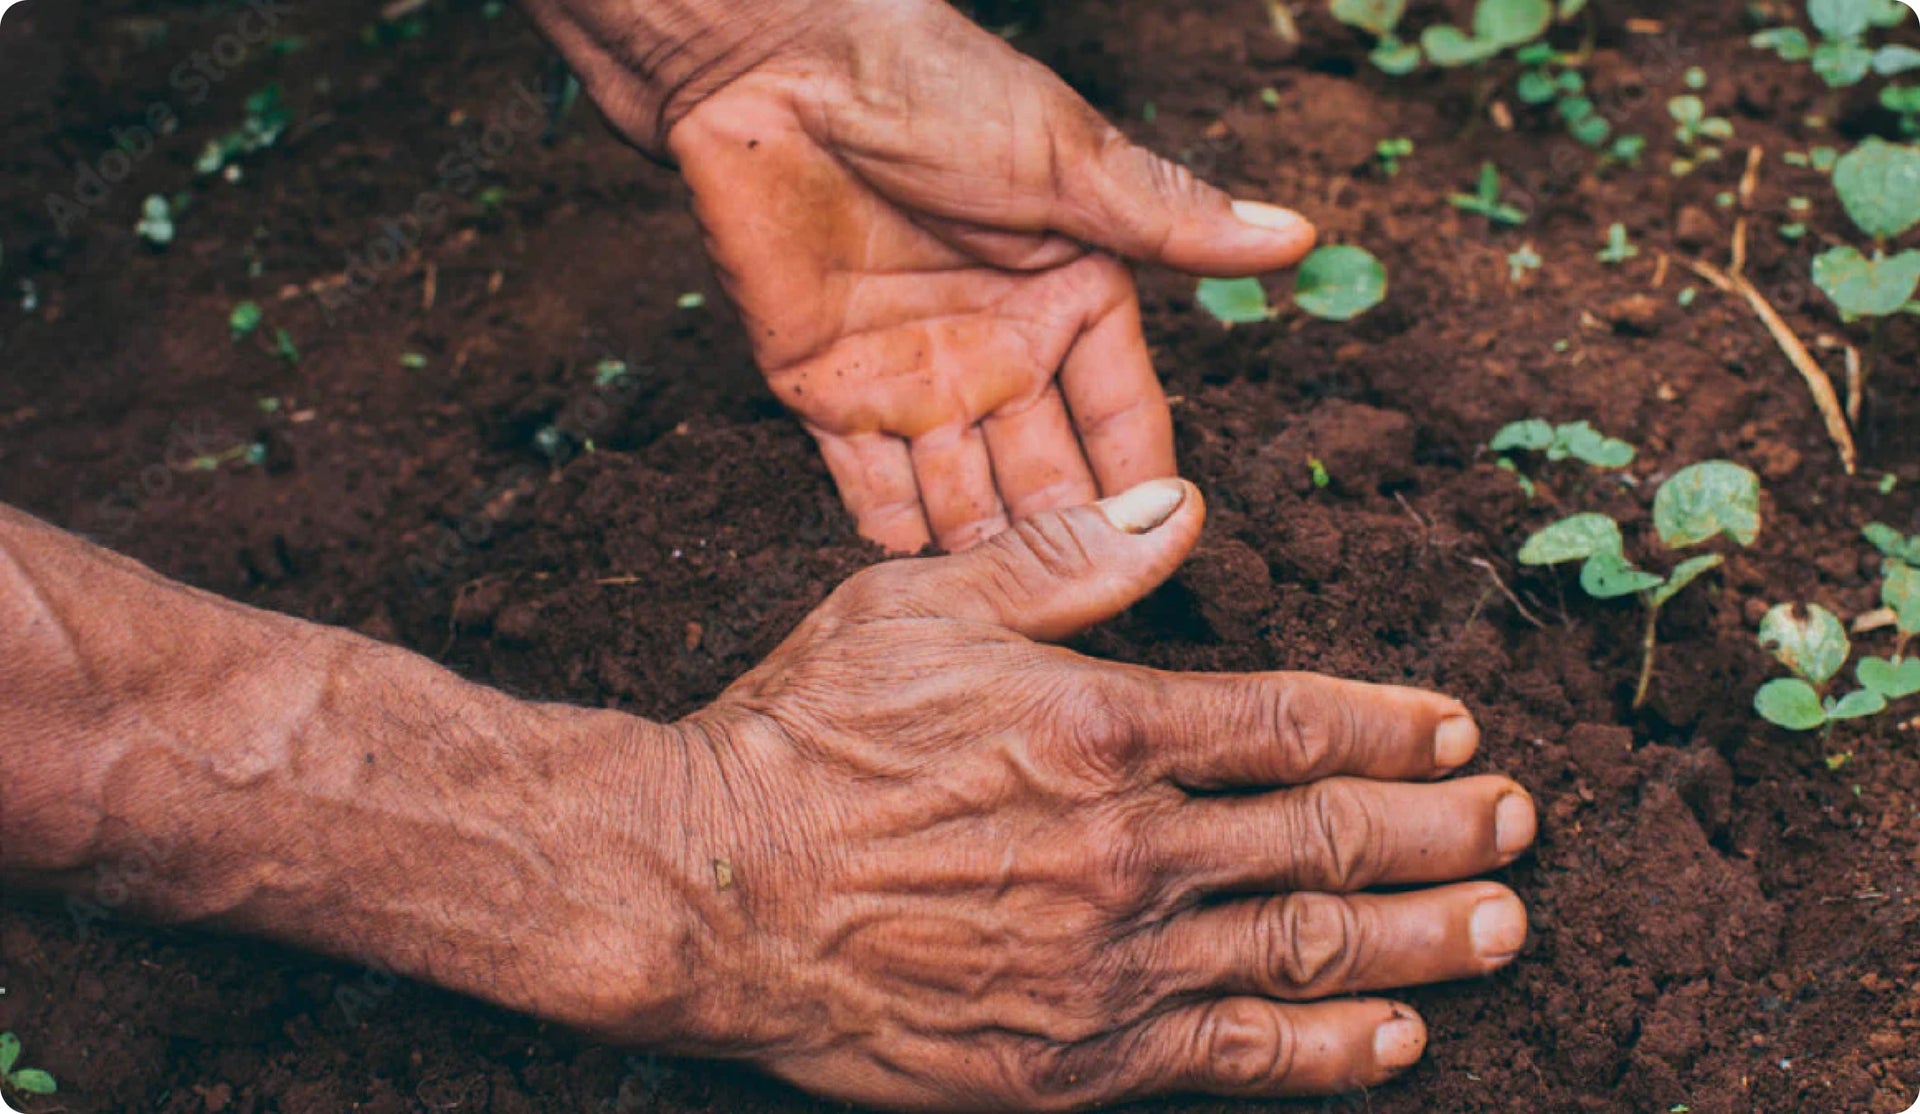 Mans hands planting new seedlings in the dirt 